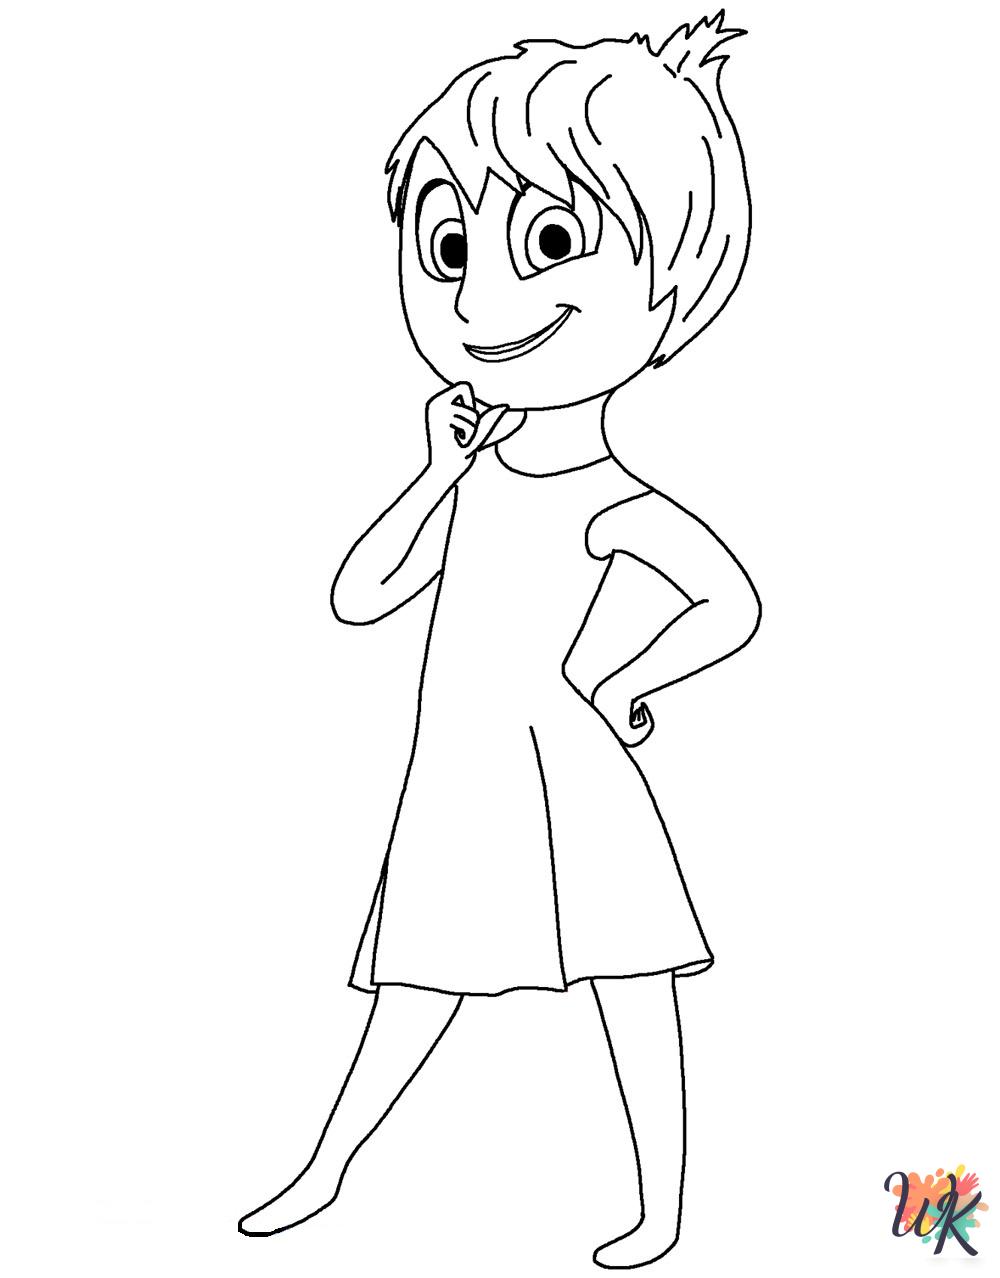 Inside Out coloring pages for kids